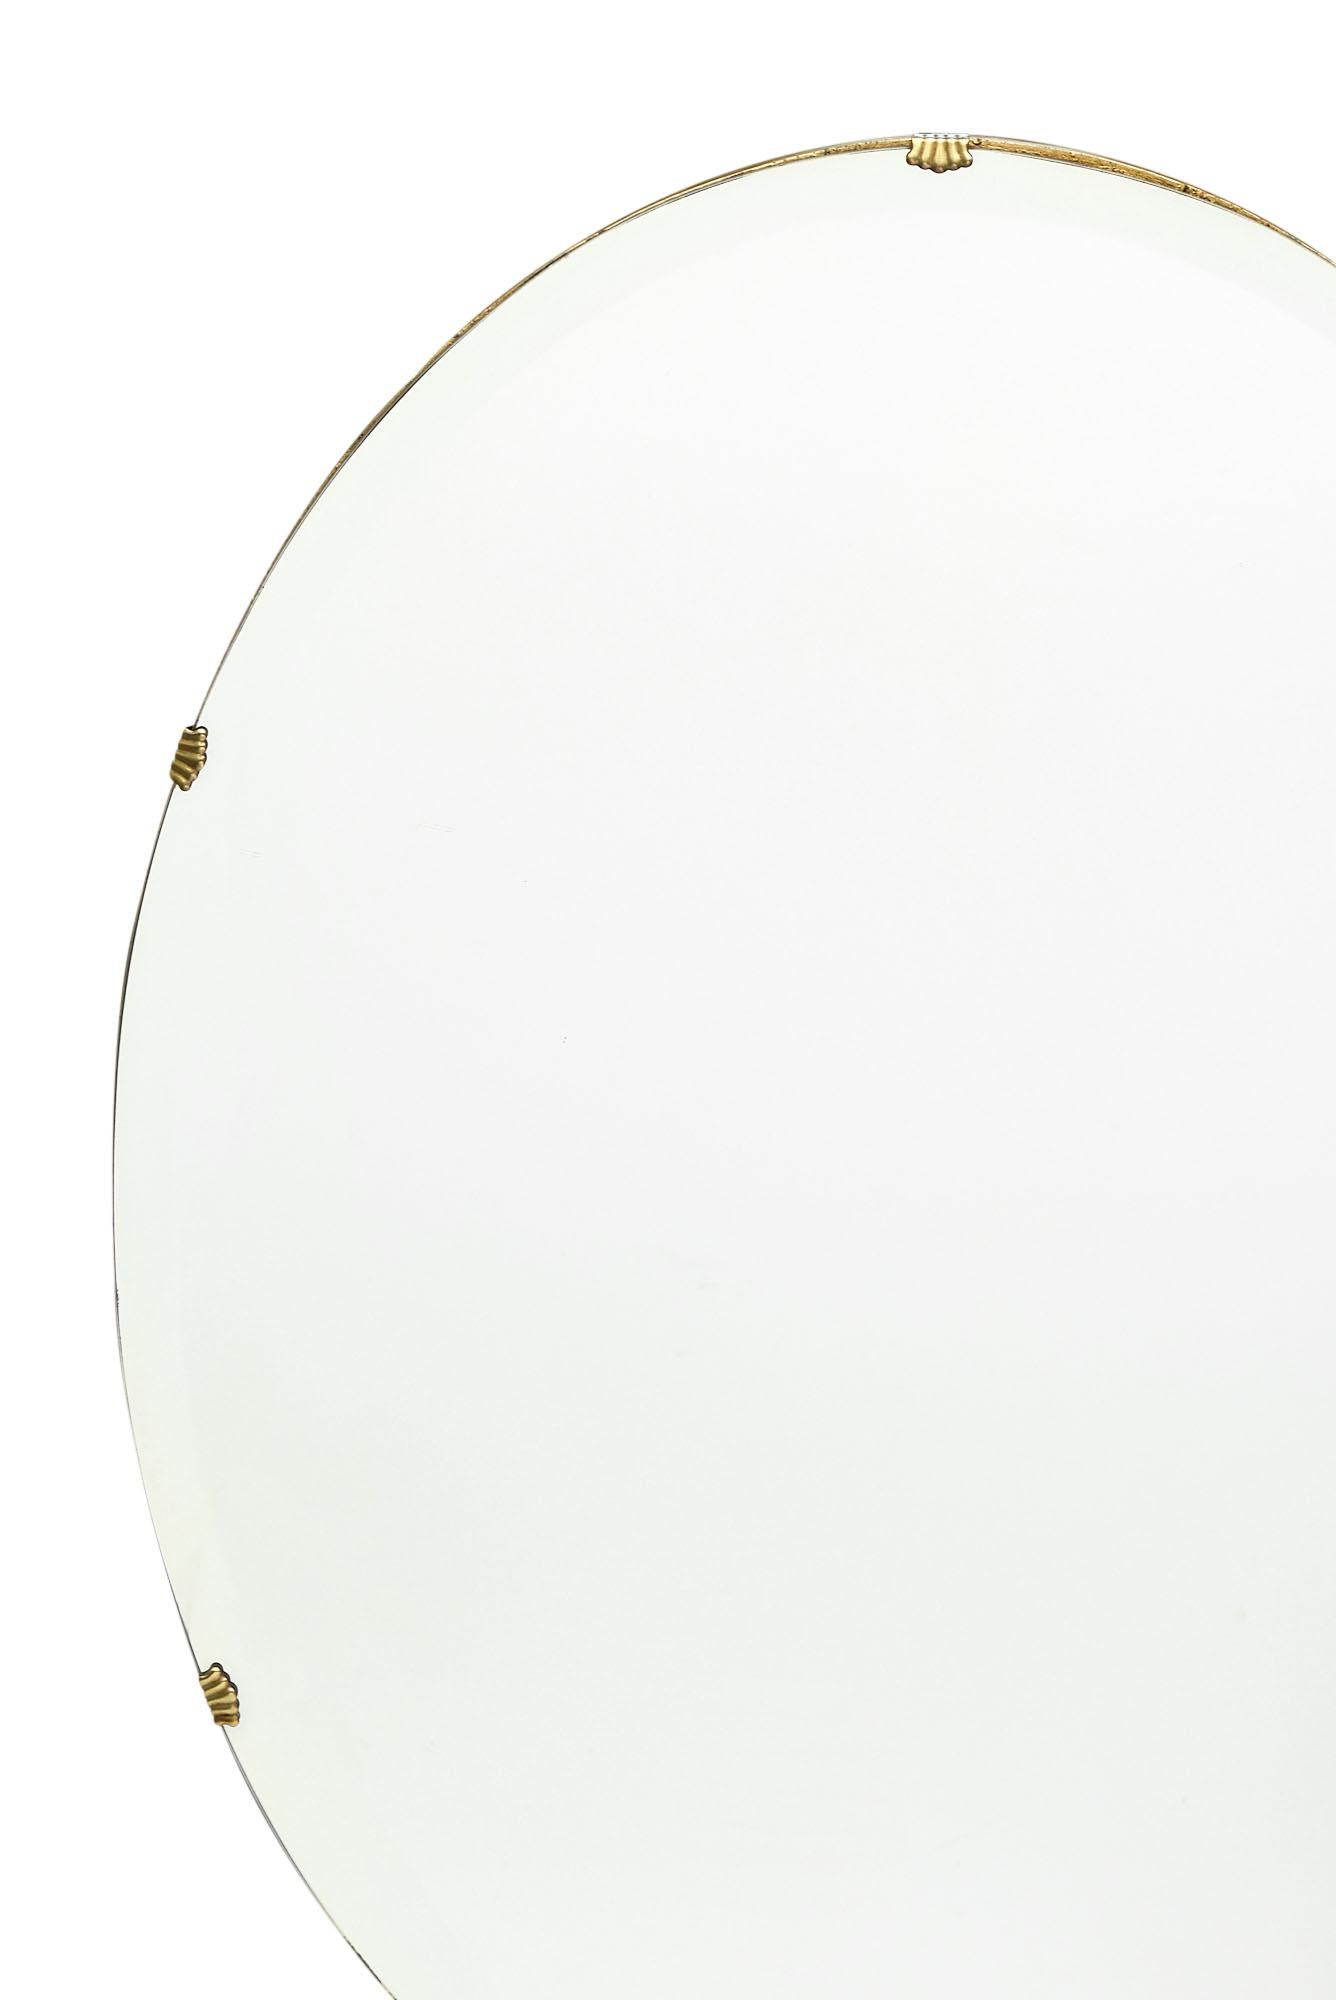 Trio of mirrors from Italy during the Art Deco period. Each piece is beveled and in an oval shape. These mirrors are from Verona. They are priced at $4500 for the trio, $1500 for a single mirror.